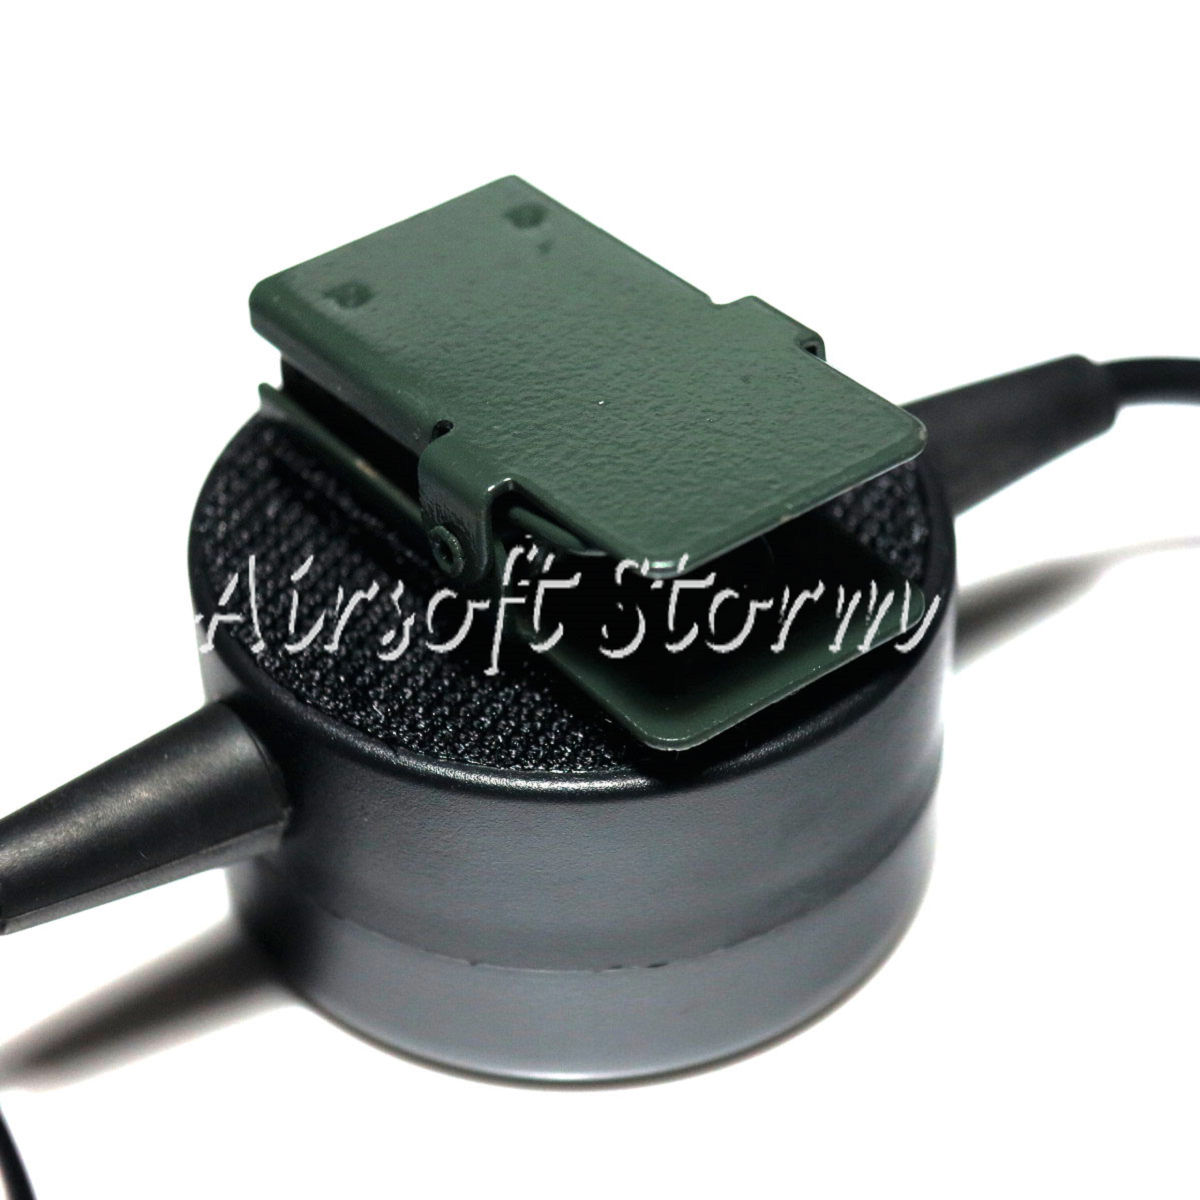 Airsoft Gear SWAT Element TCI Headset PTT for Kenwood 2 Pin Radio